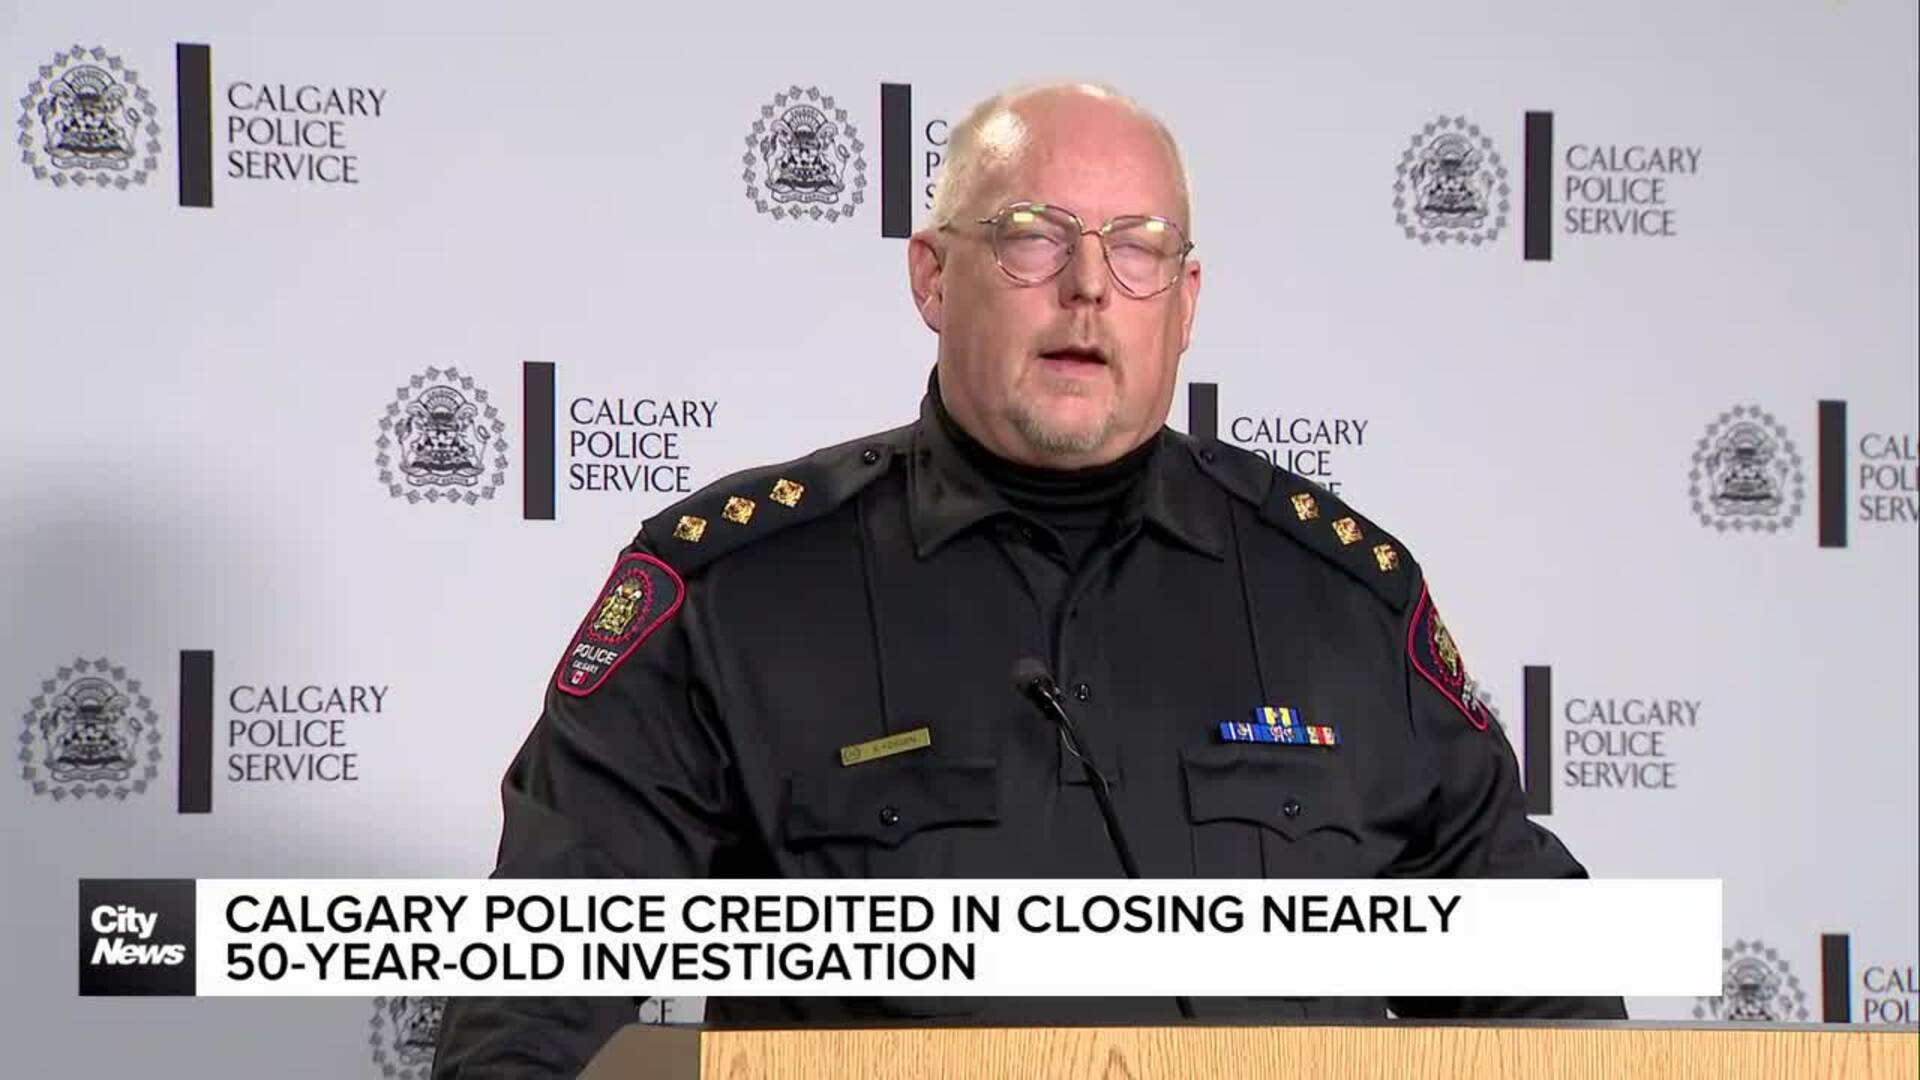 Calgary police credited in closing nearly 50-year-old investigation